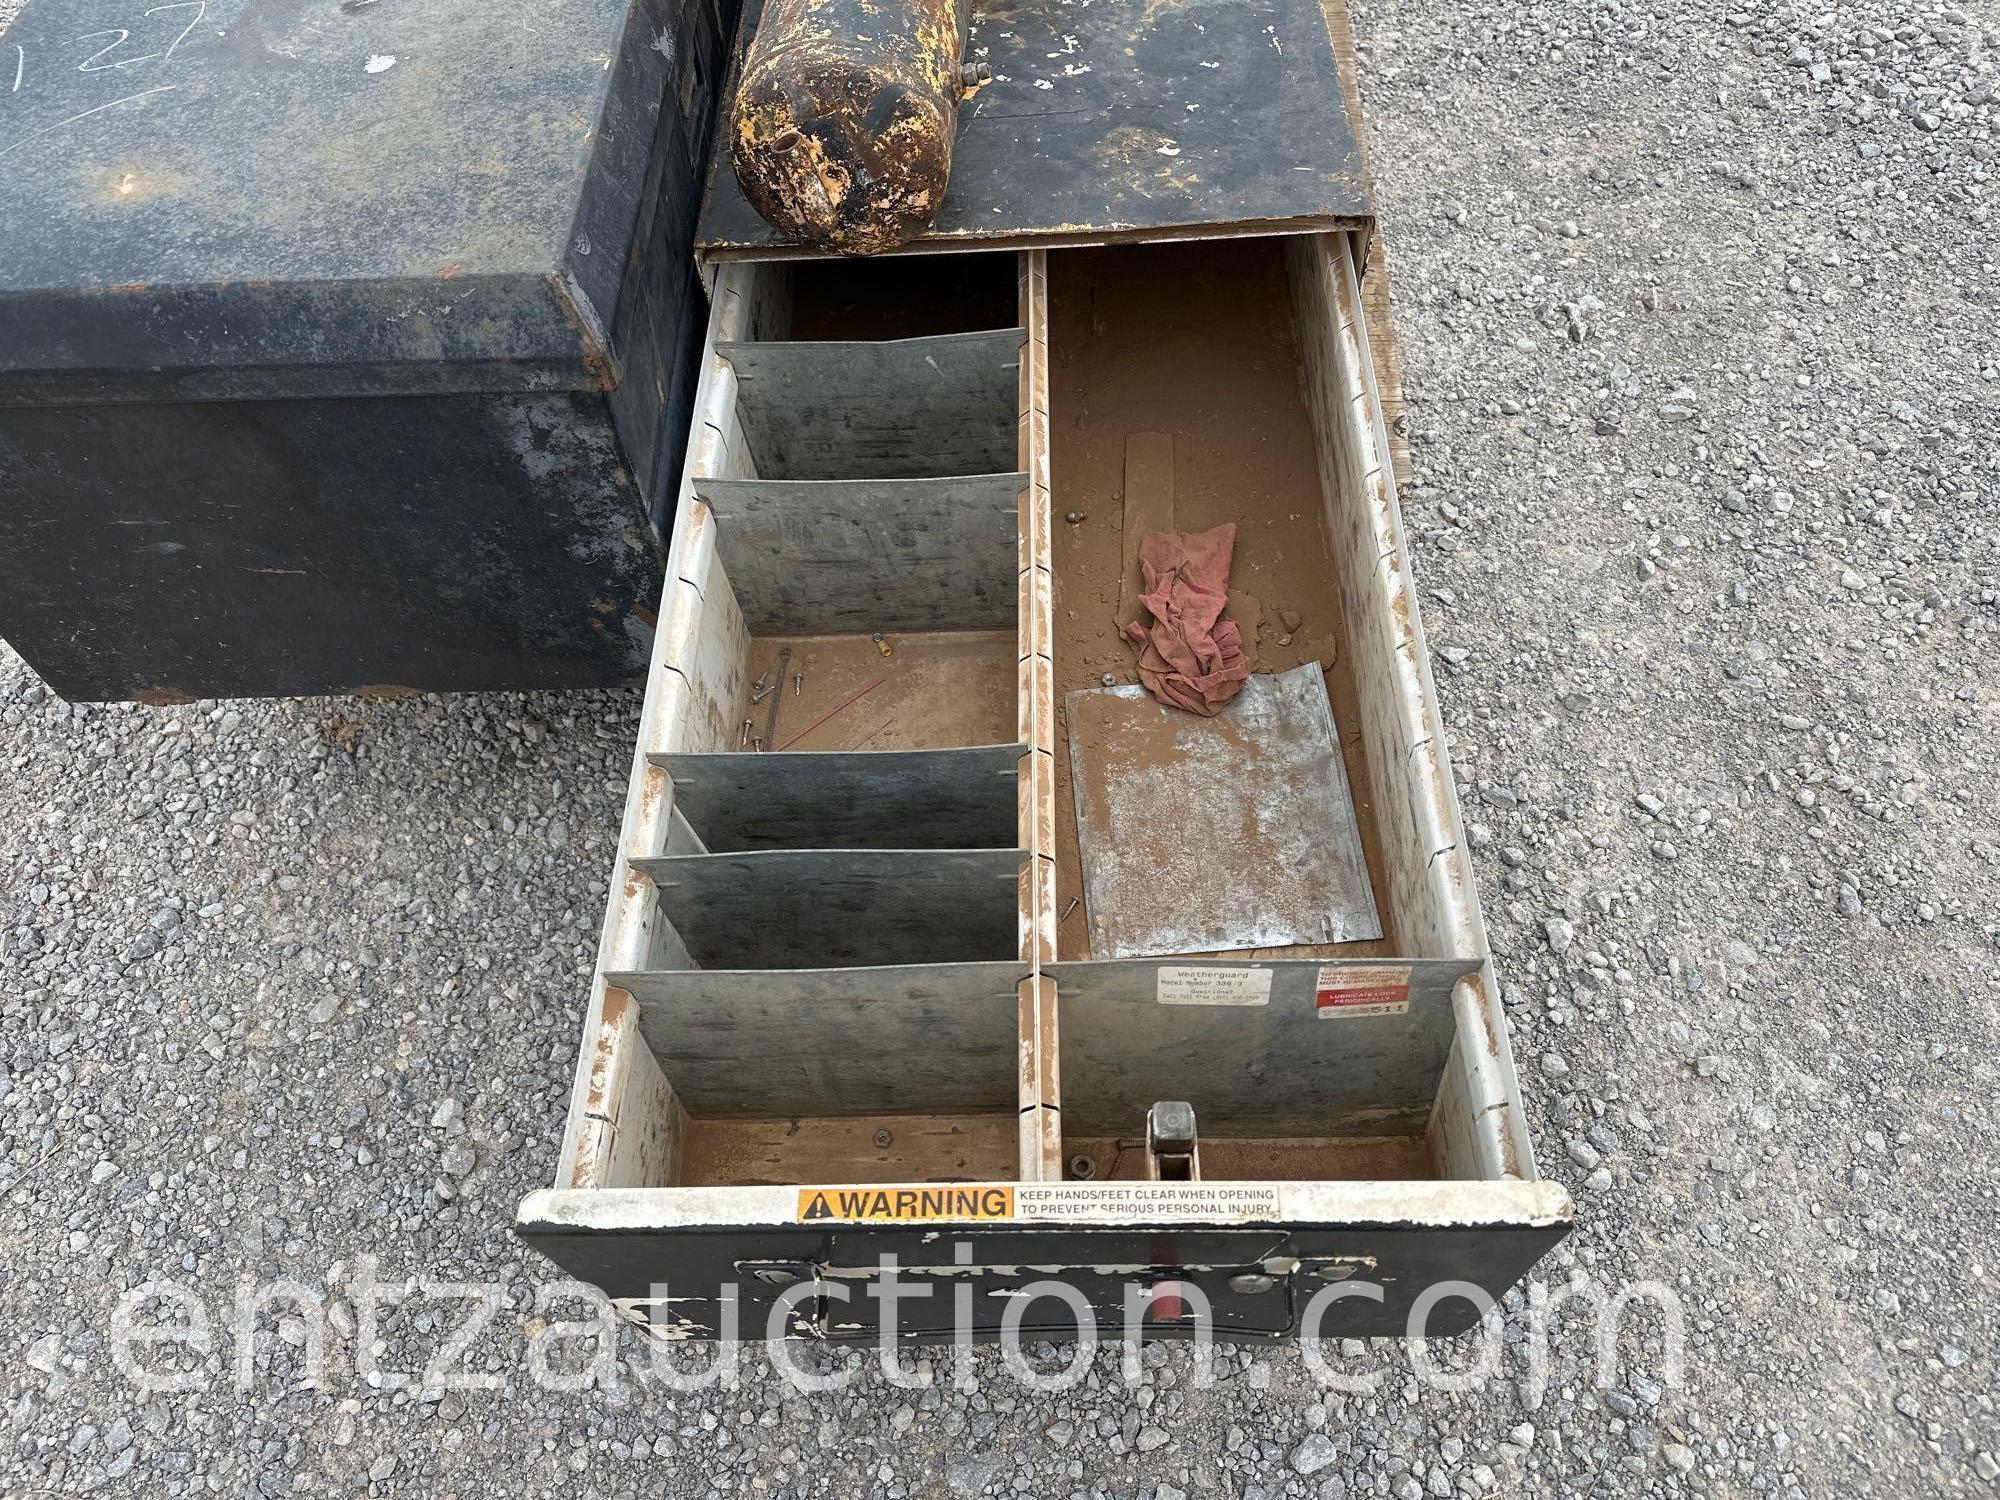 PALLET OF TOOLBOXES - CHEST TYPE TOOL BOX,